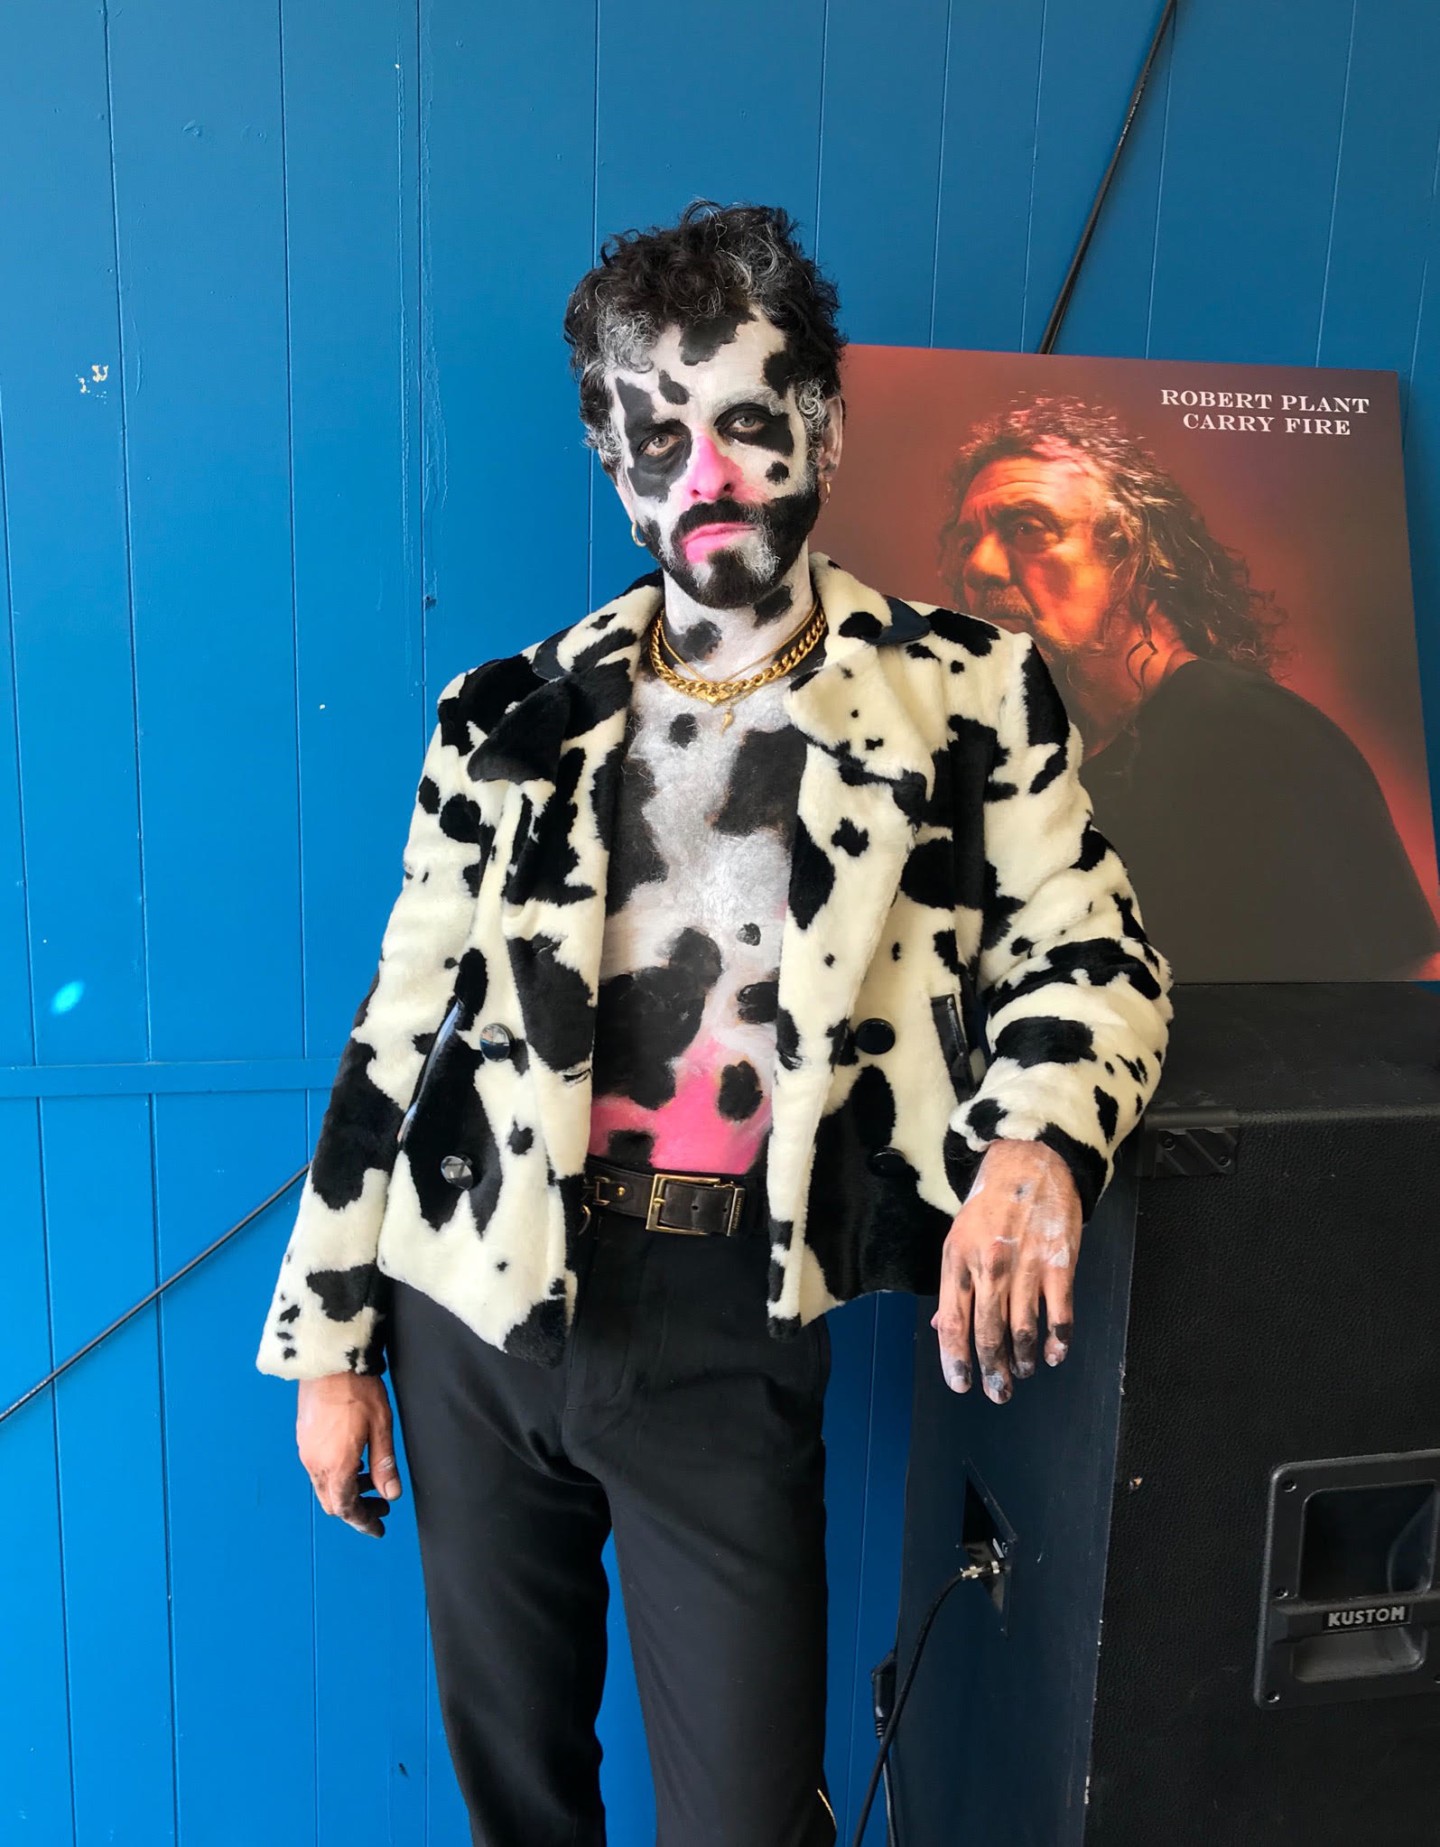 SSION is back to breathe fresh life into pop